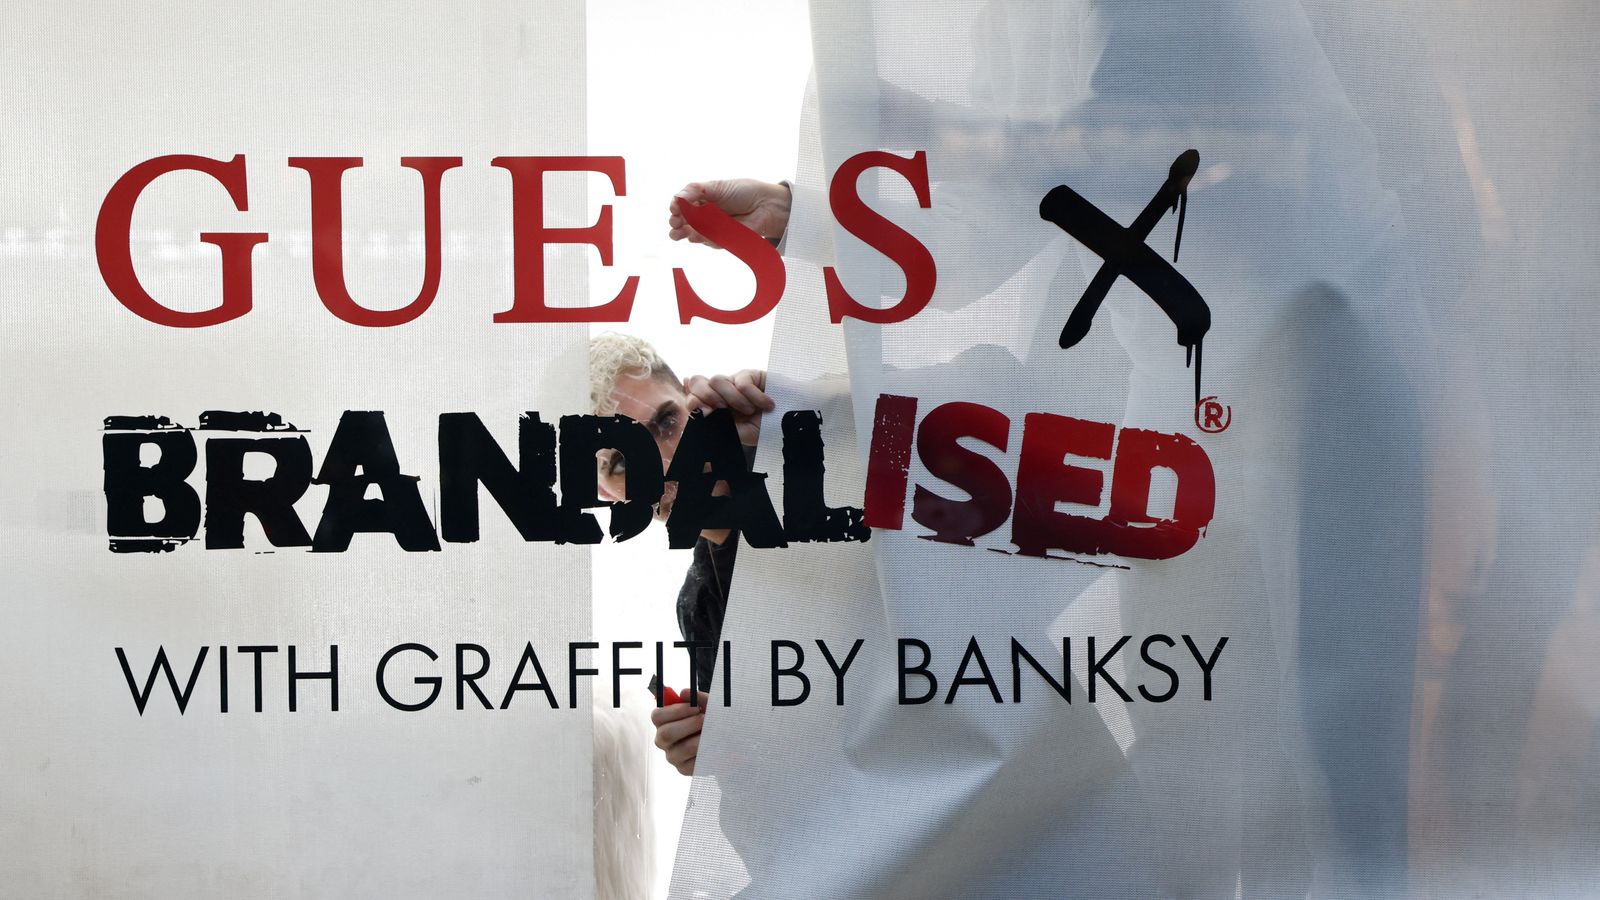 Banksy urges shoplifters to 'help themselves' to Guess clothing after copyright row